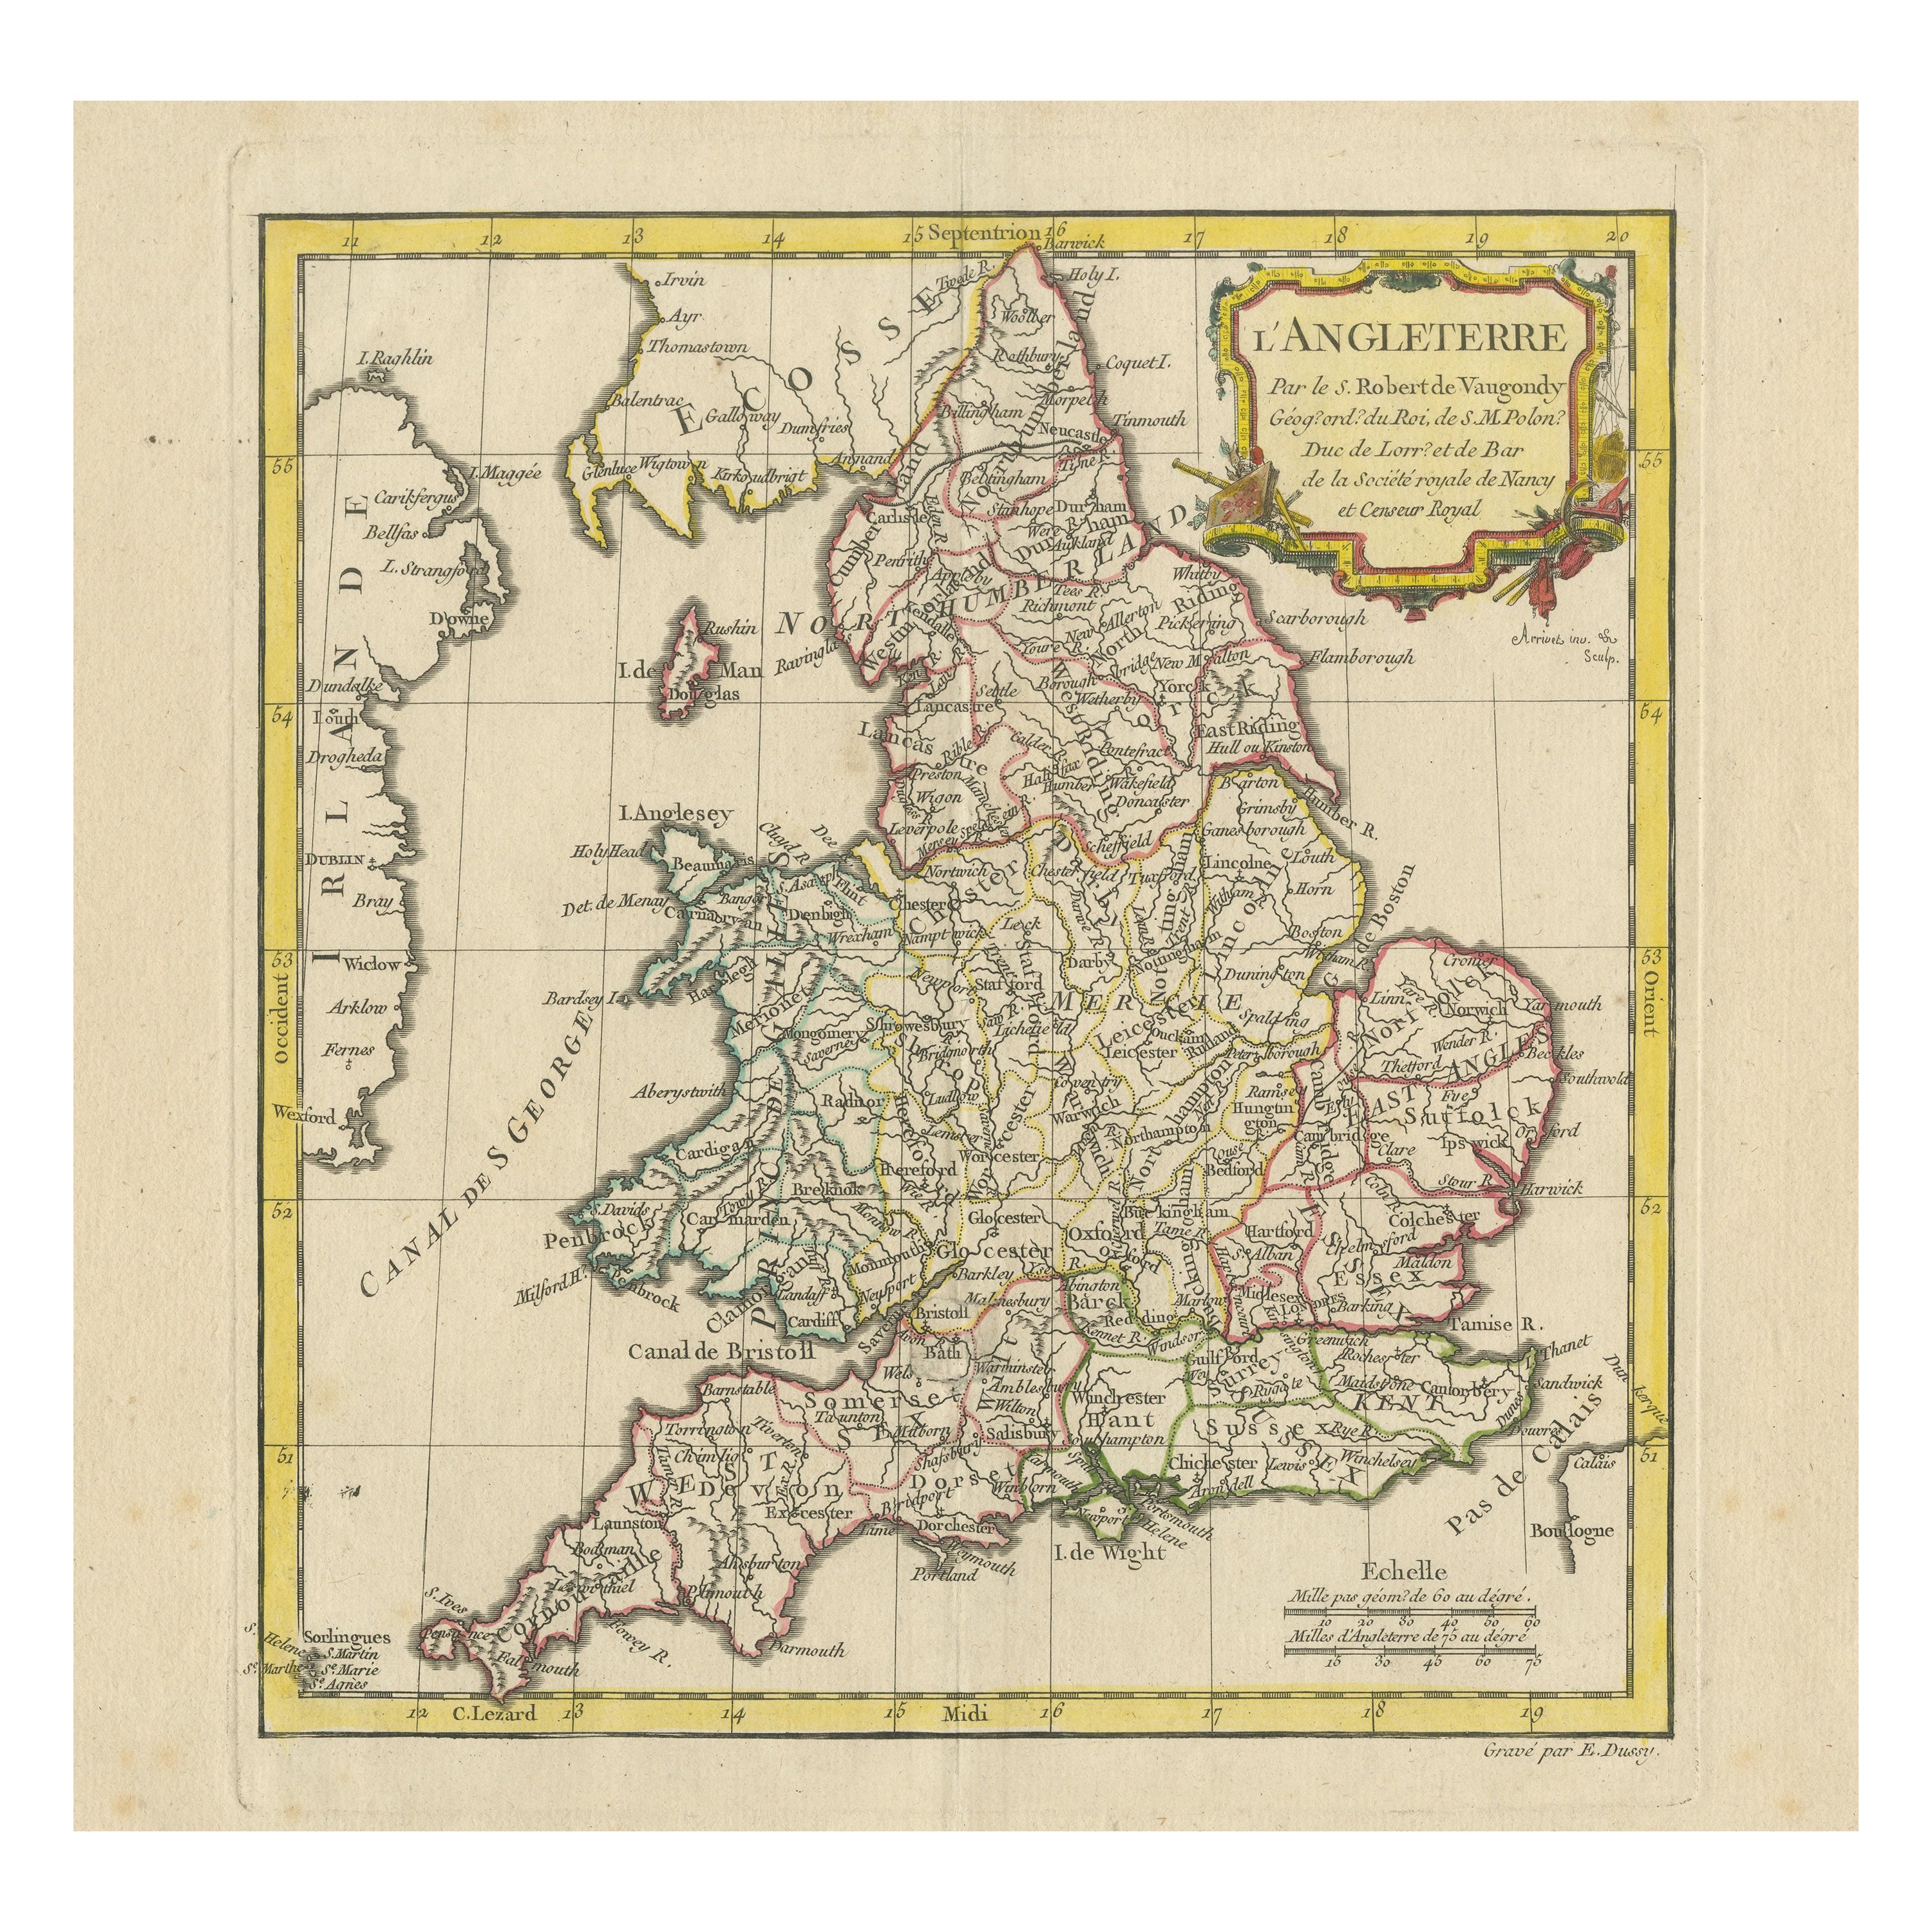 Original Antique Map of England with Decorative Cartouche For Sale